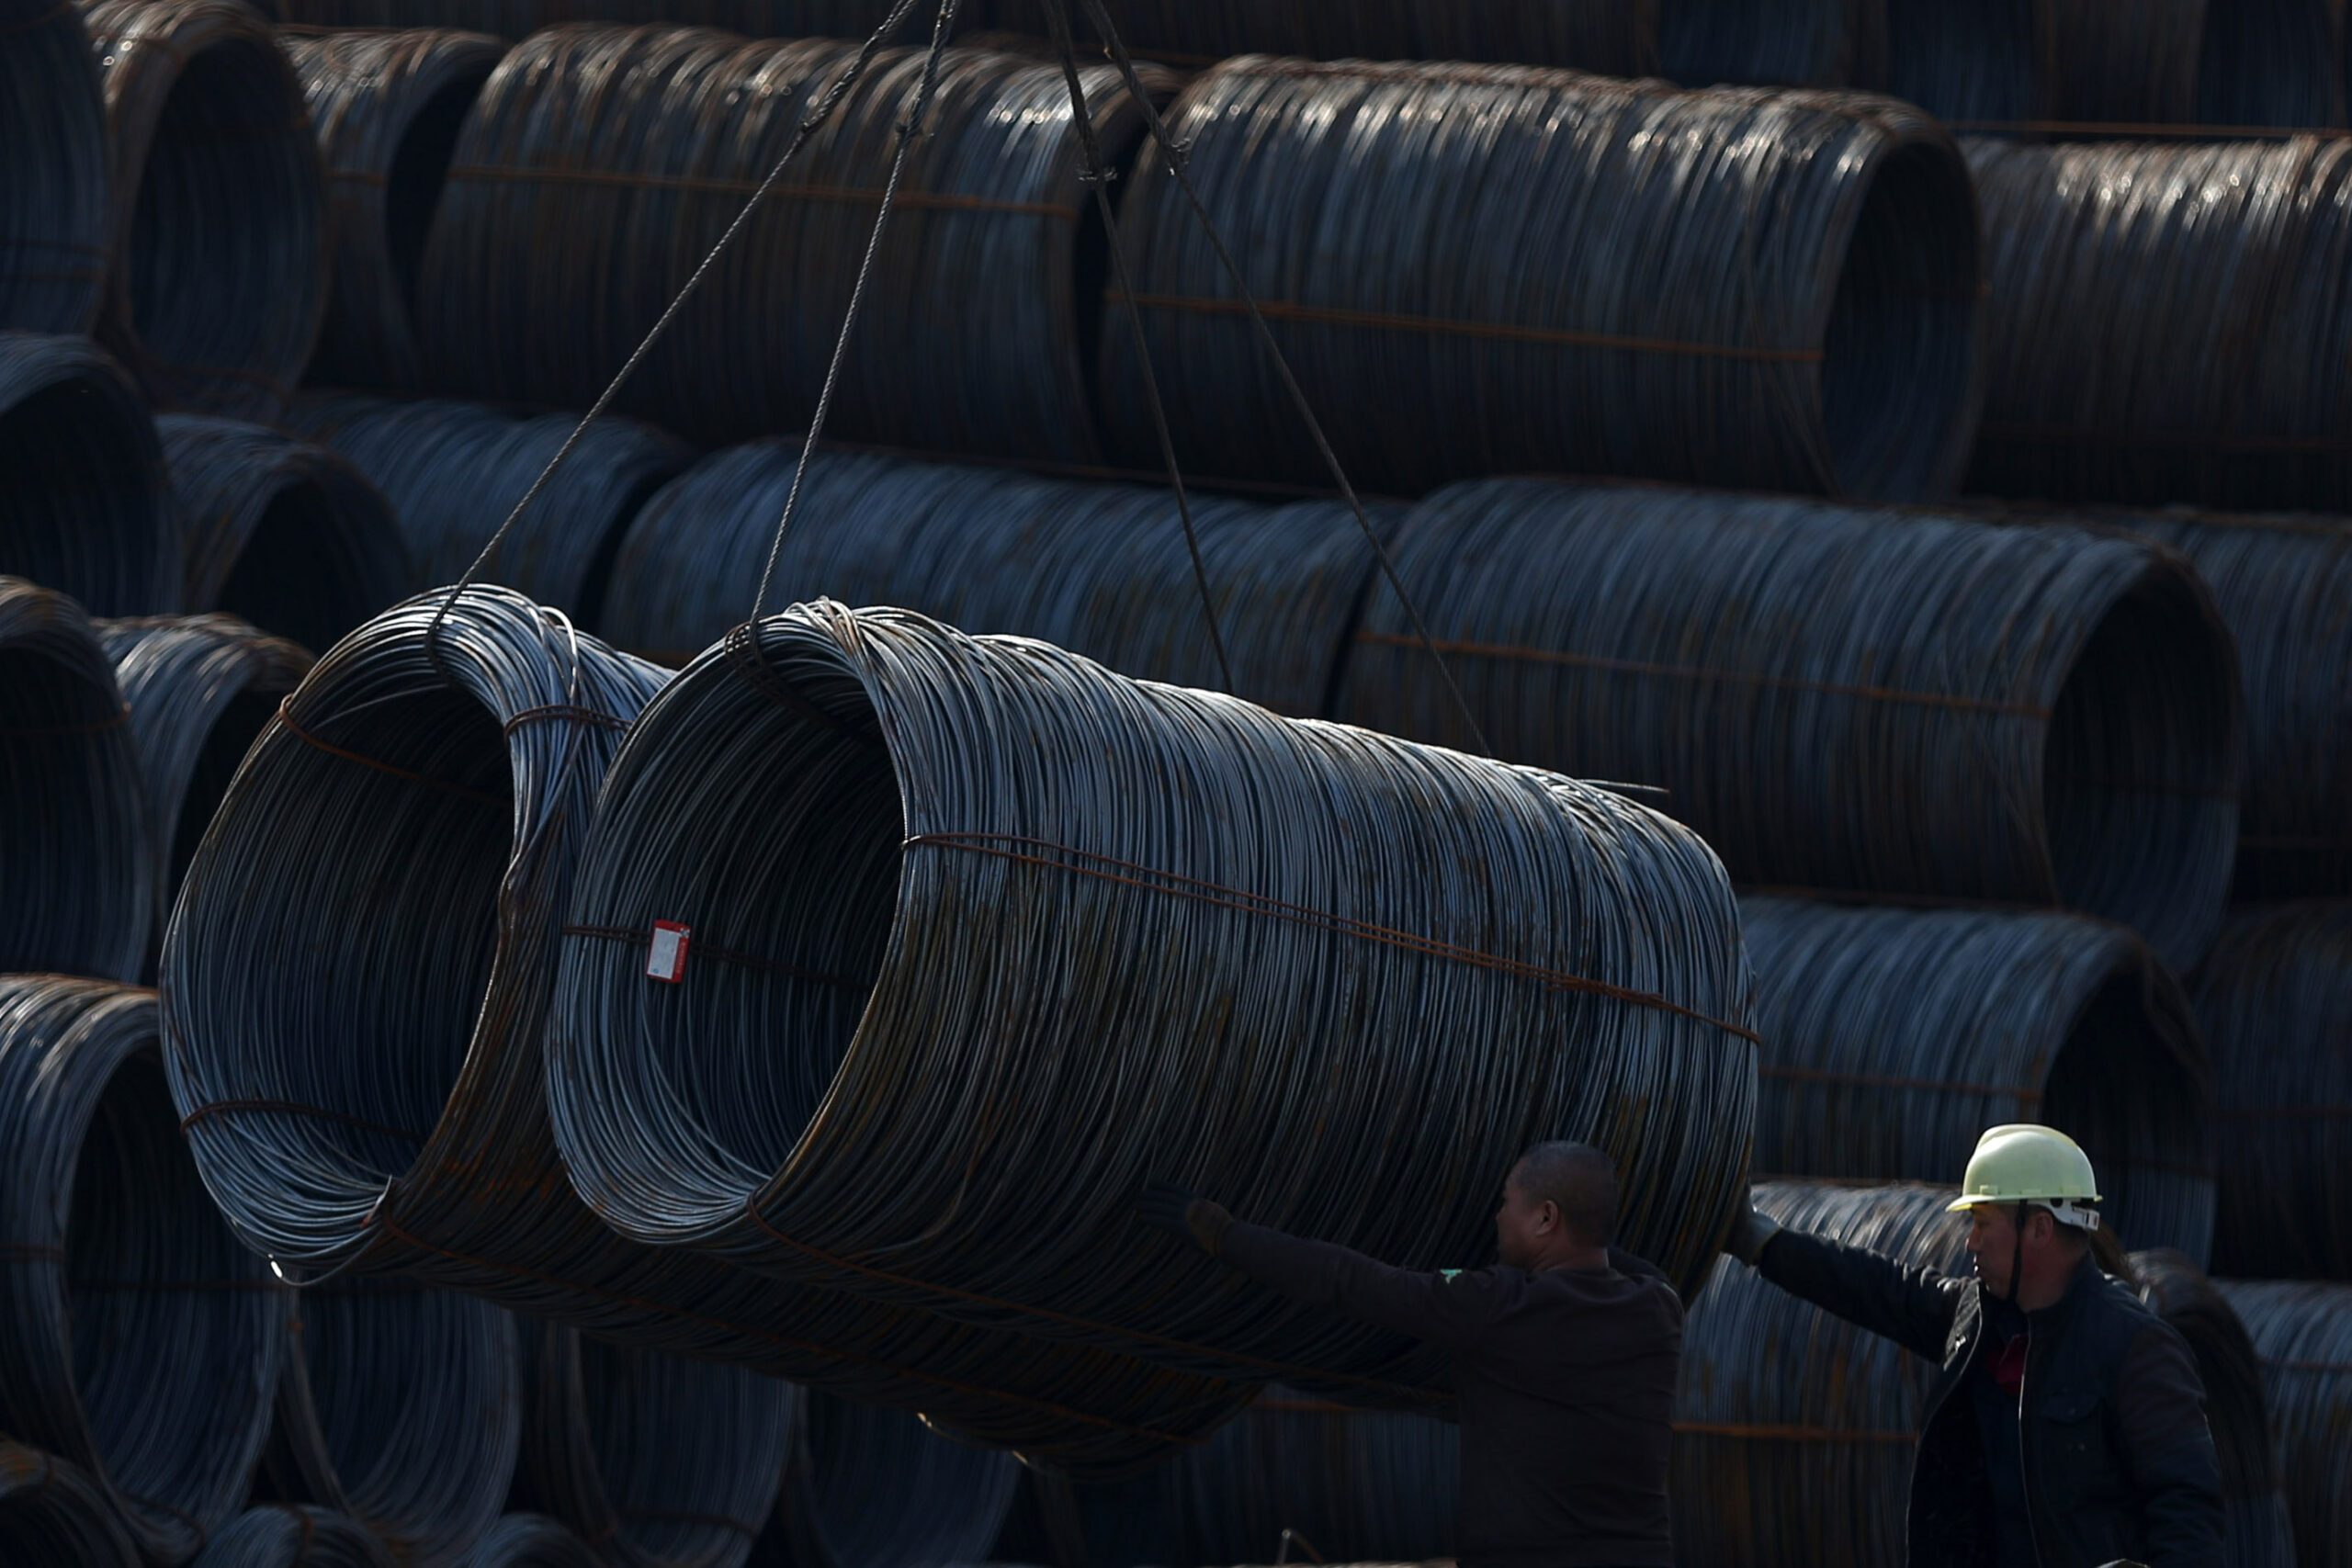 China defends ground in steel crisis talks